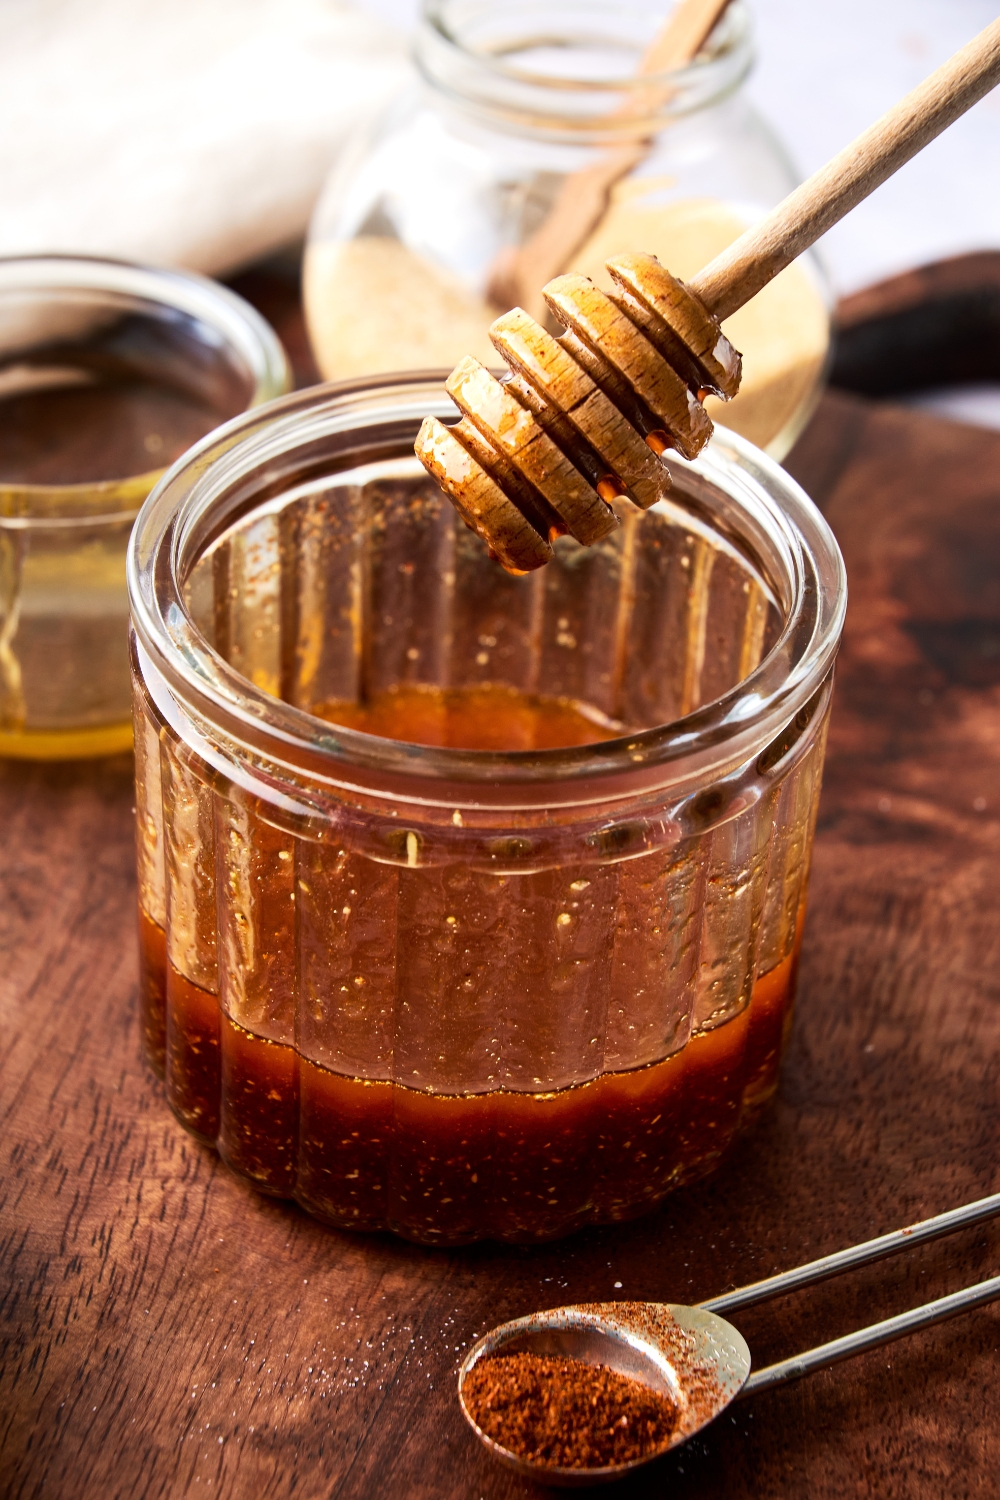 Someone holds a honey dipper over a glass jar full of hot honey.